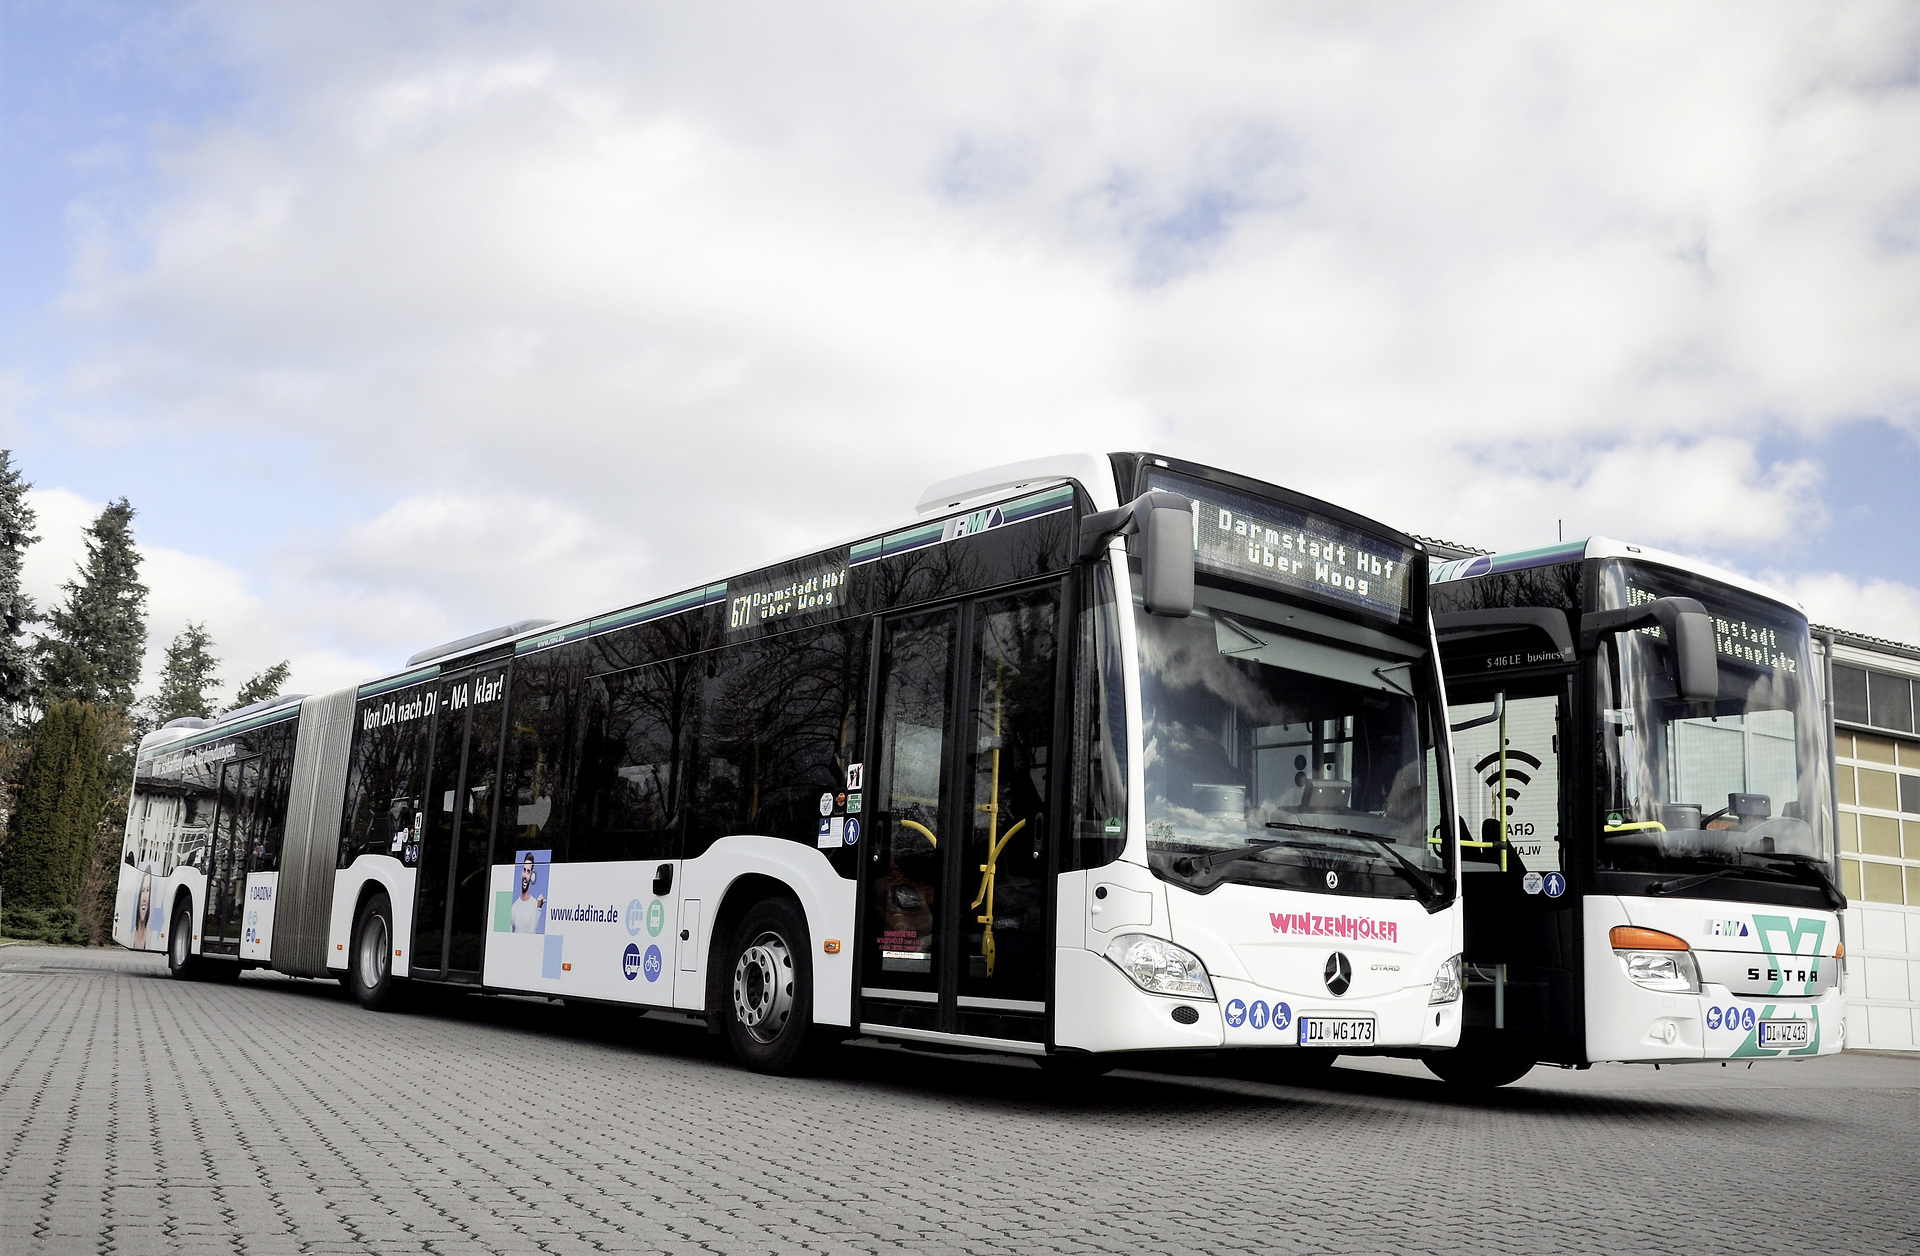 20 New Buses for the Darmstadt Region